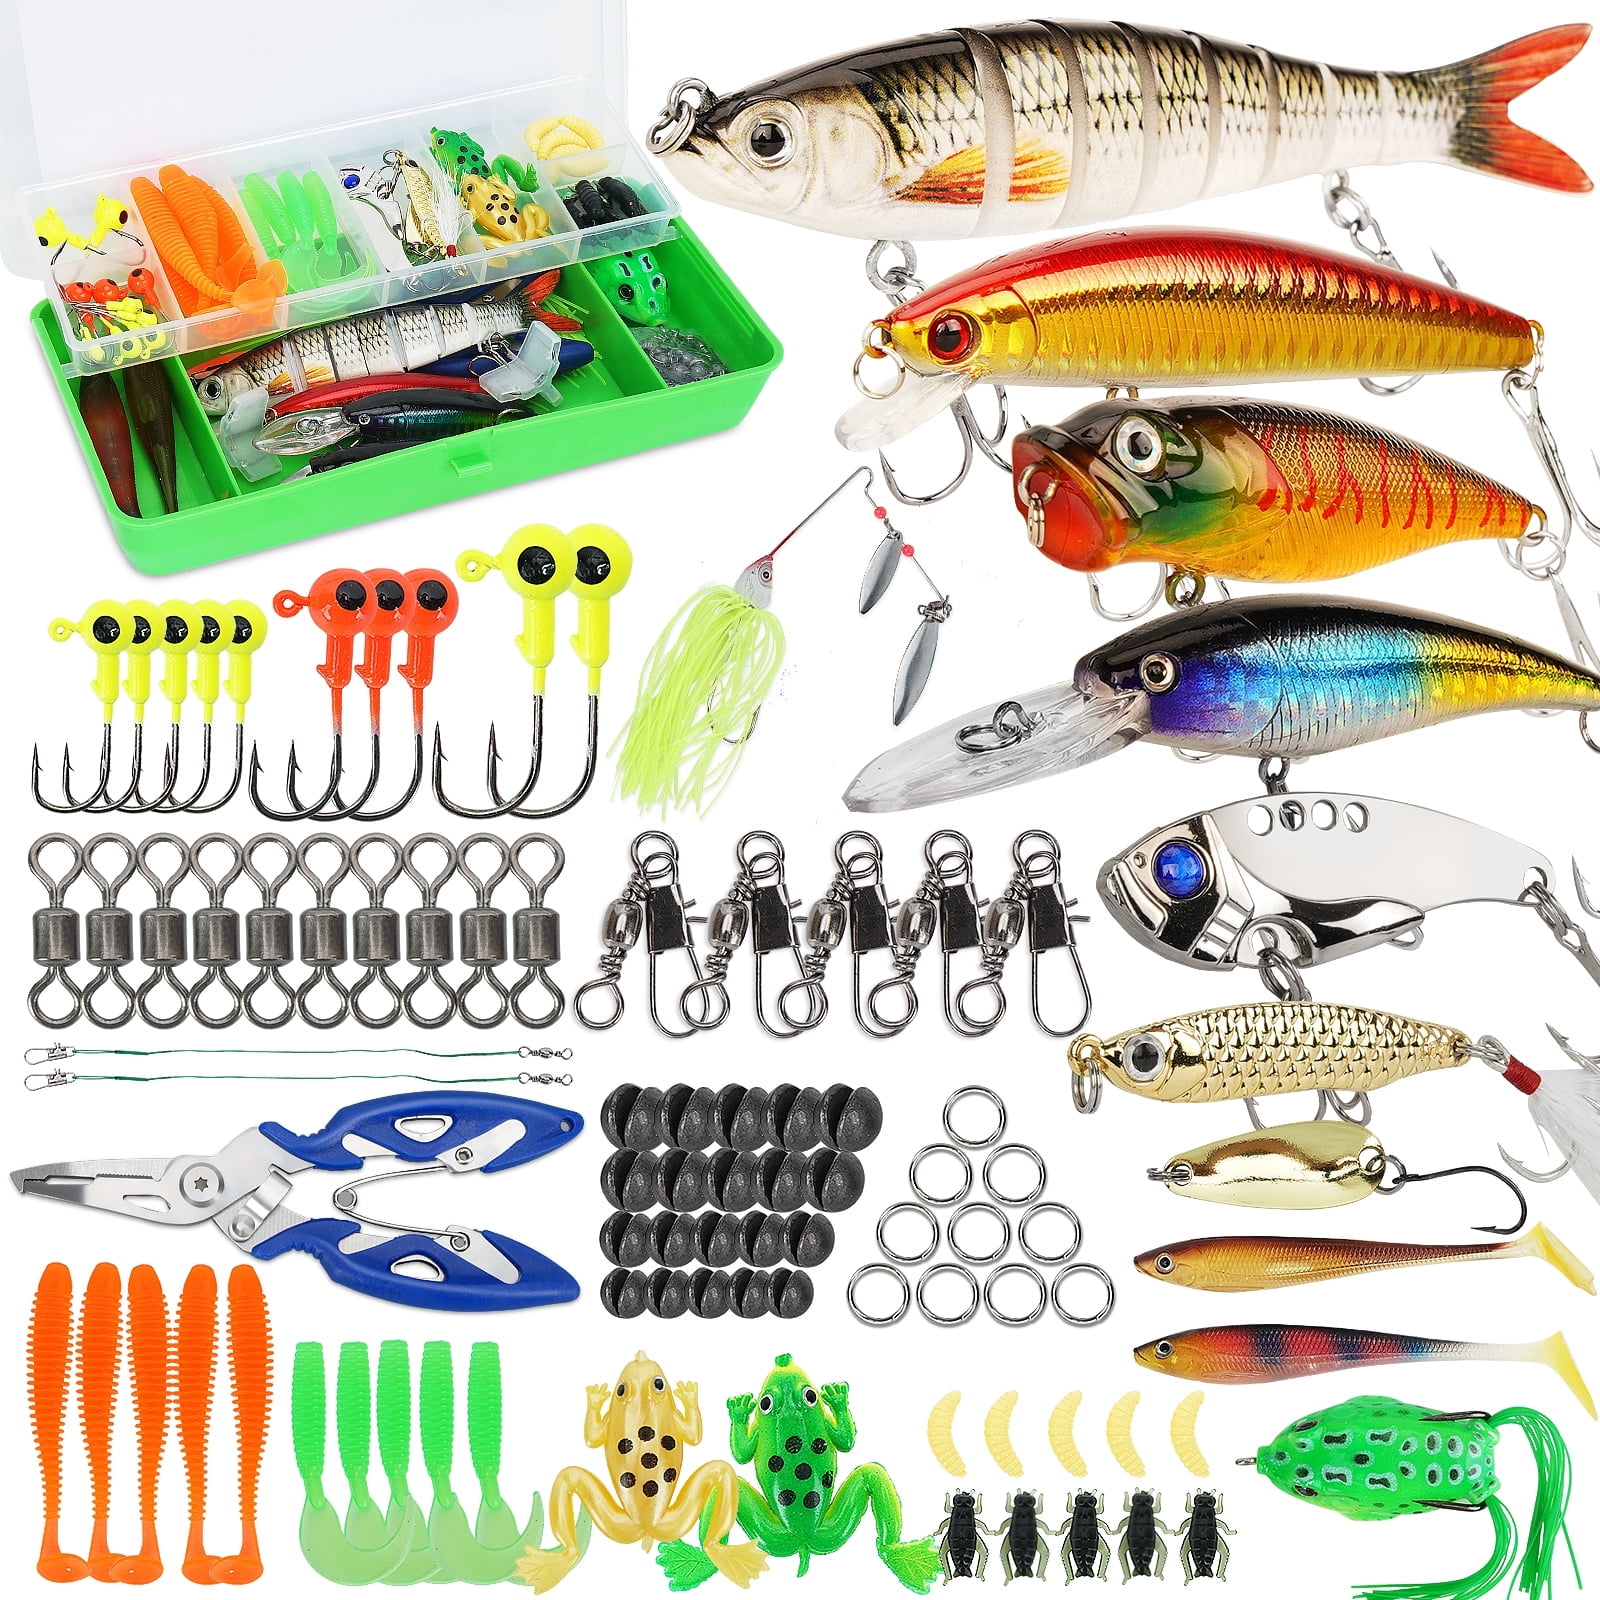 Fishing Lures Tackle Box Bass Fishing Baits Including Animated  Lure,Crankbaits,Soft Plastic Worms,Topwater Lures etc Saltwater &  Freshwater Fishing